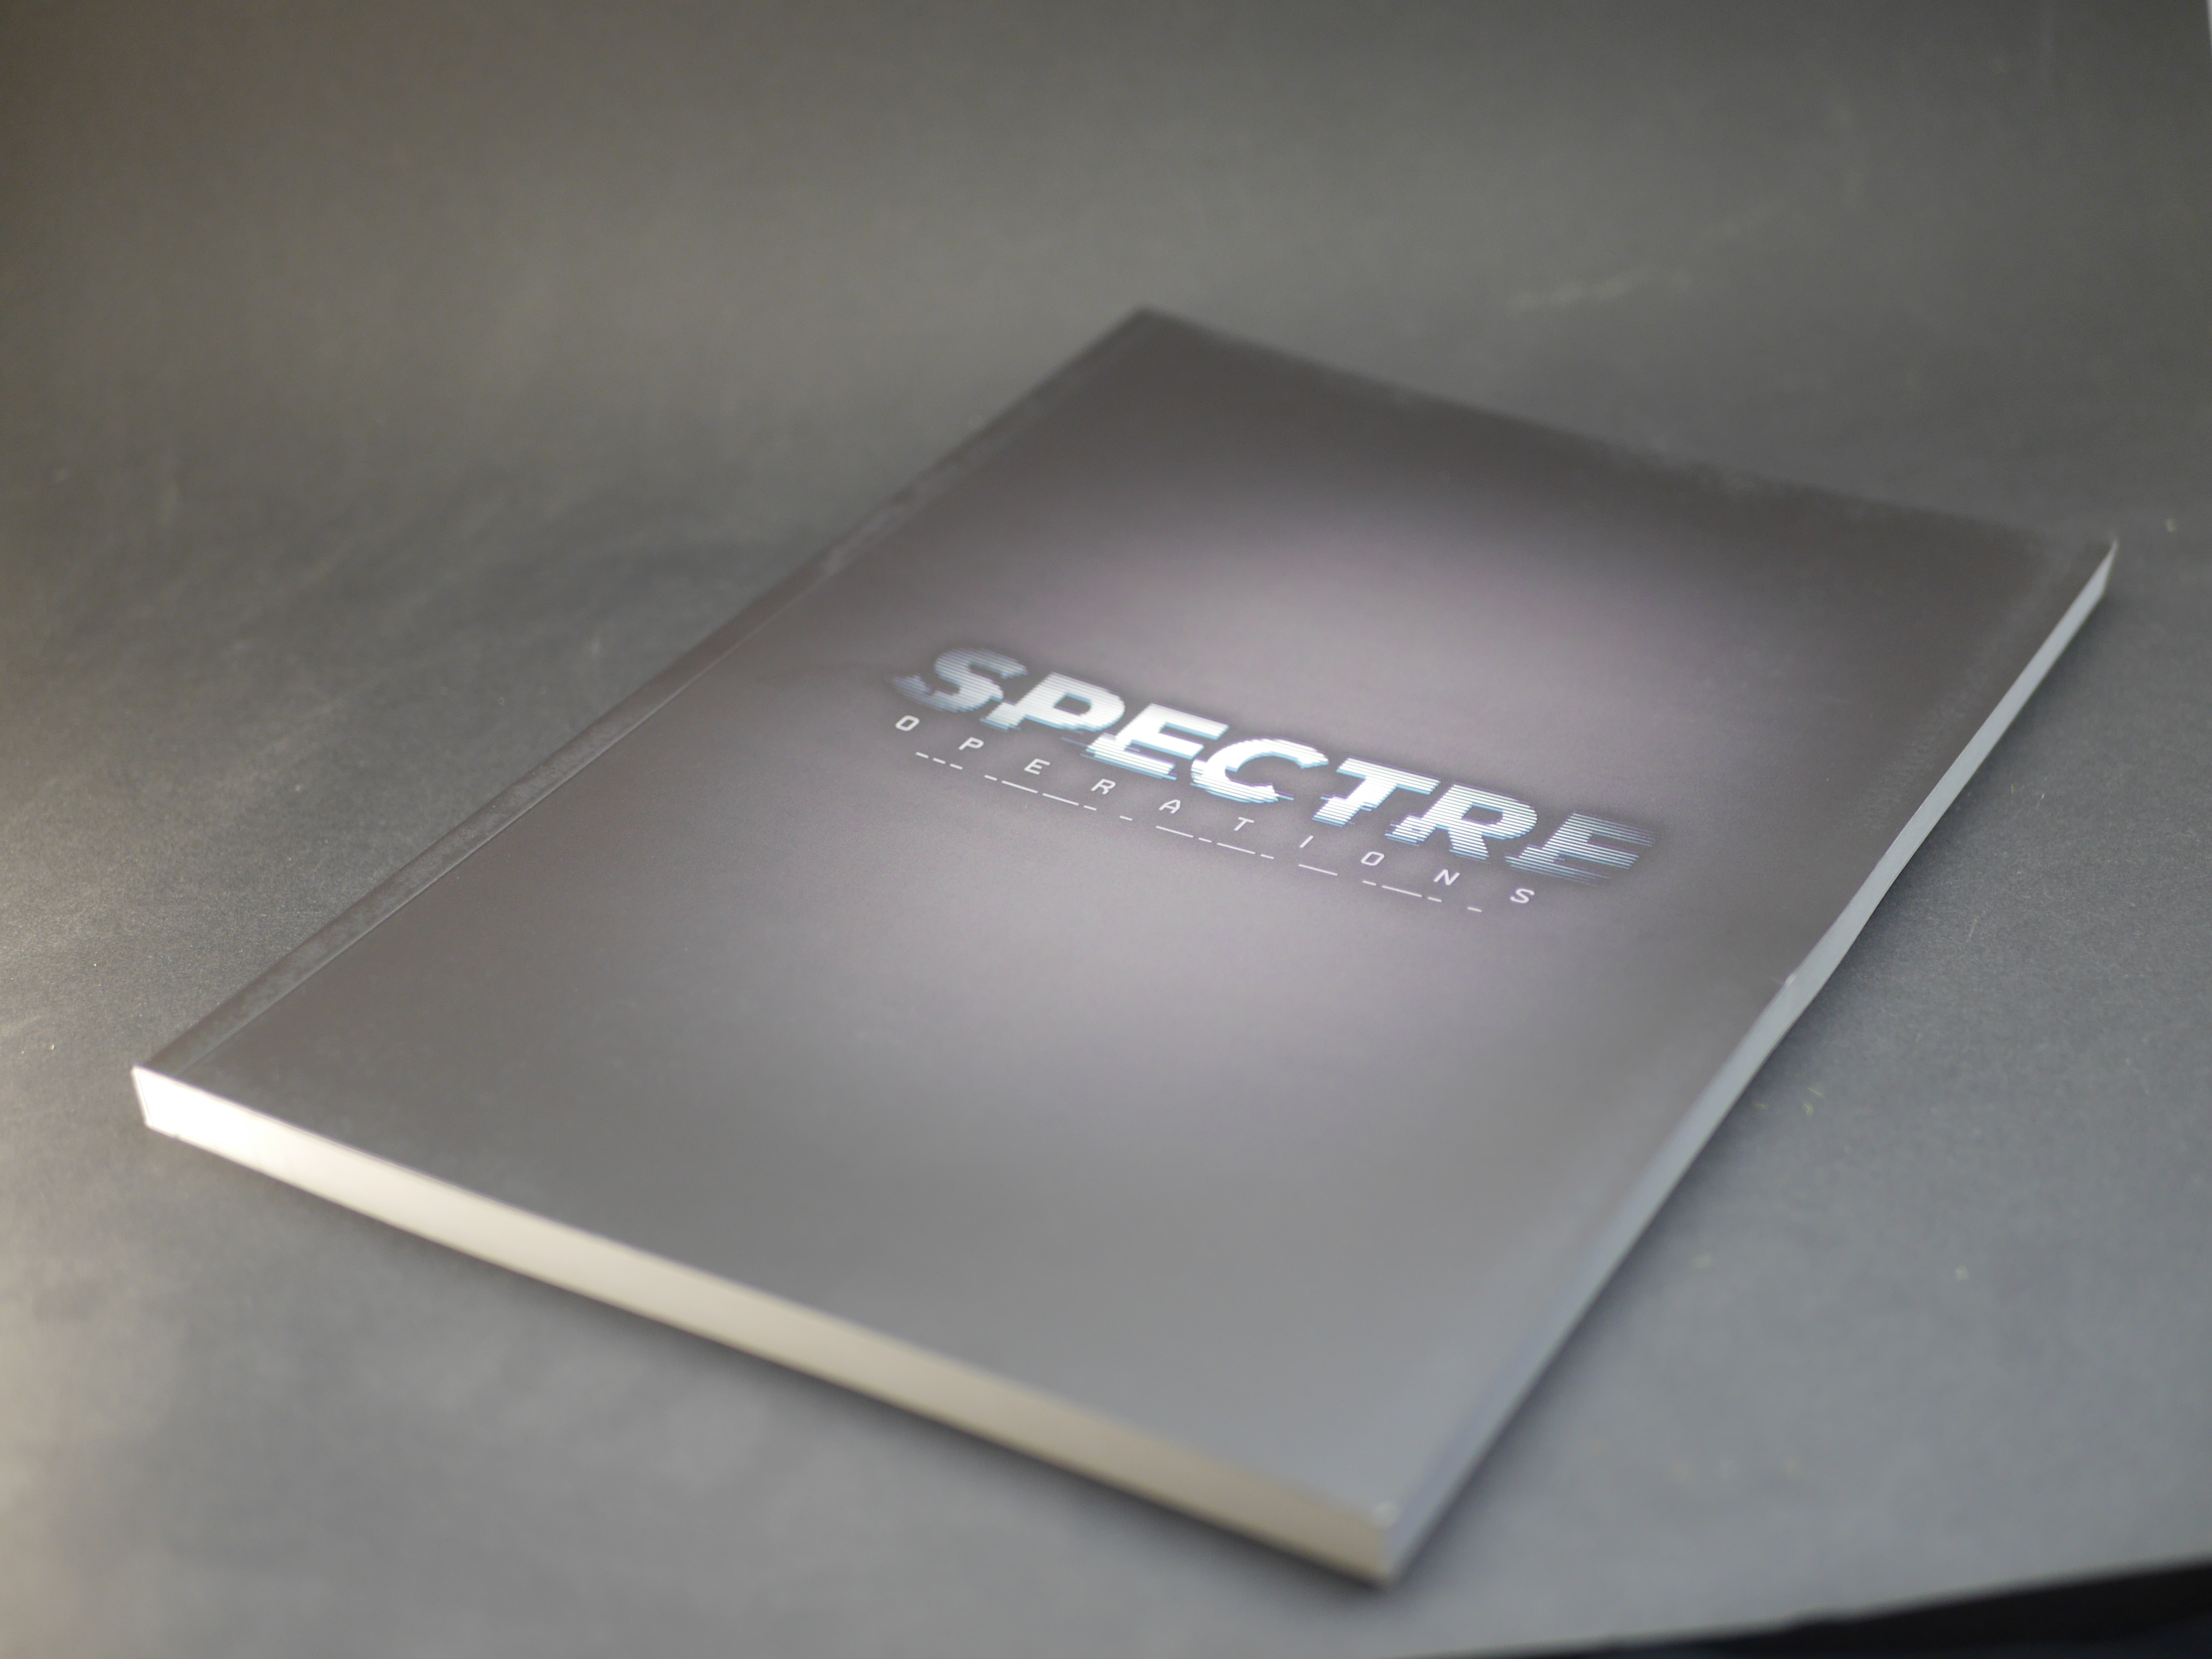 Spectre: Operations Rulebook